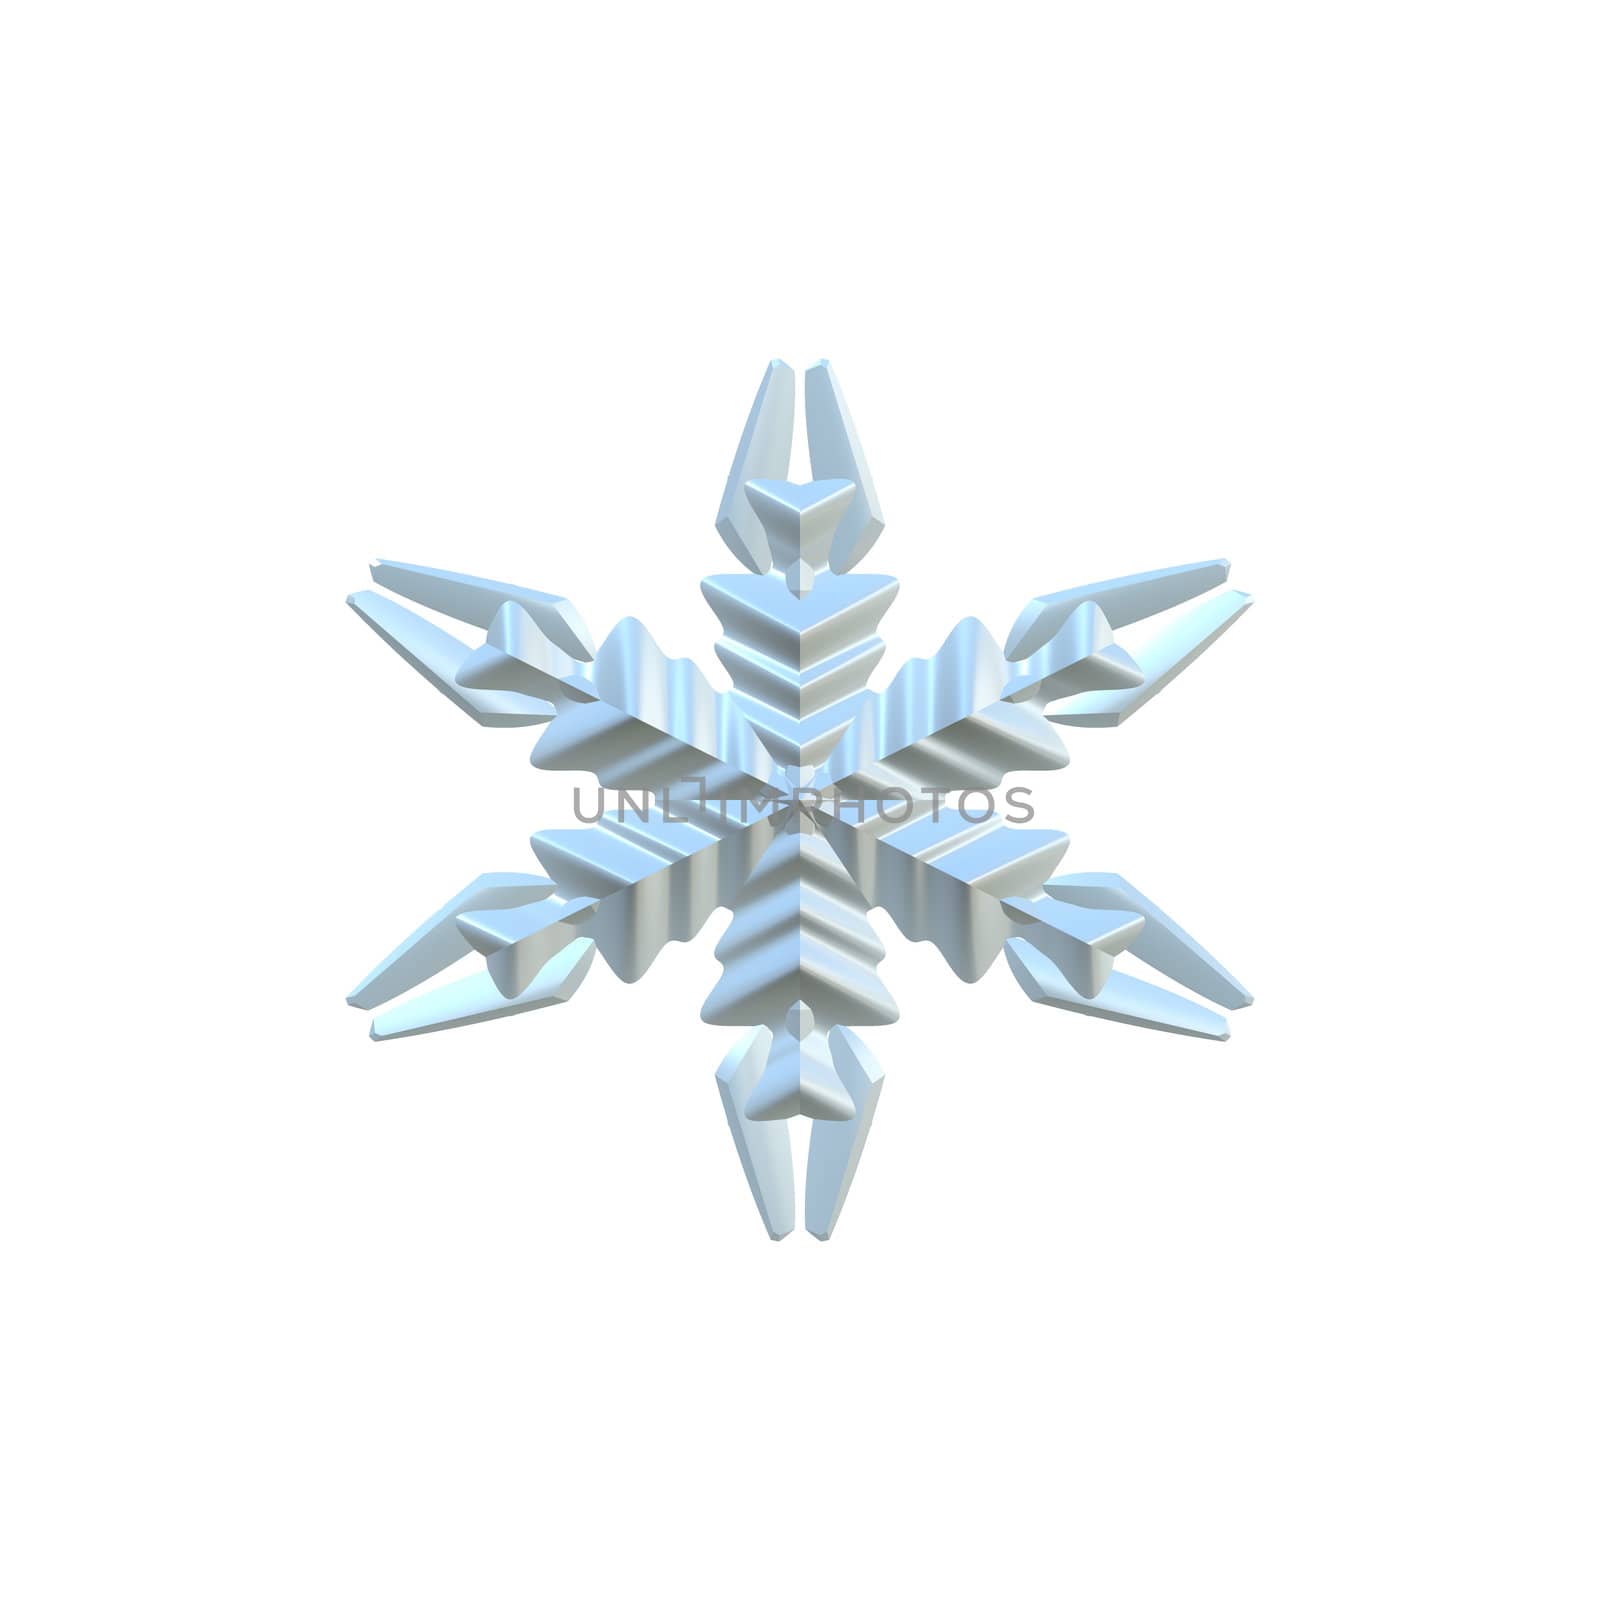 A 3d snowflake illustration isolated over white.